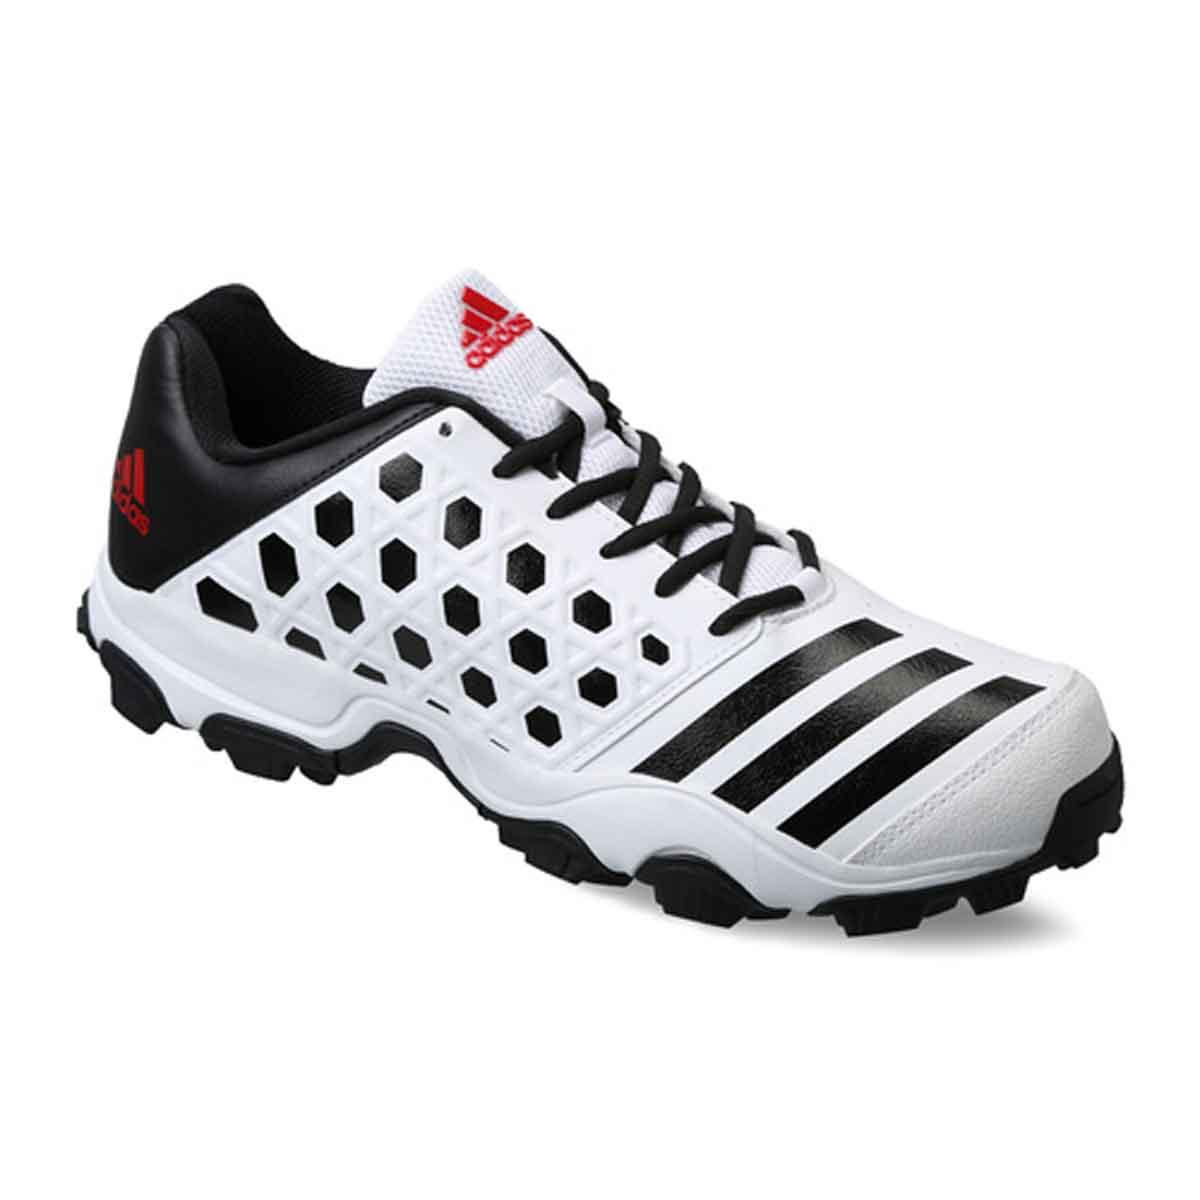 Buy Adidas SL22 Trainer Cricket Shoes Online India